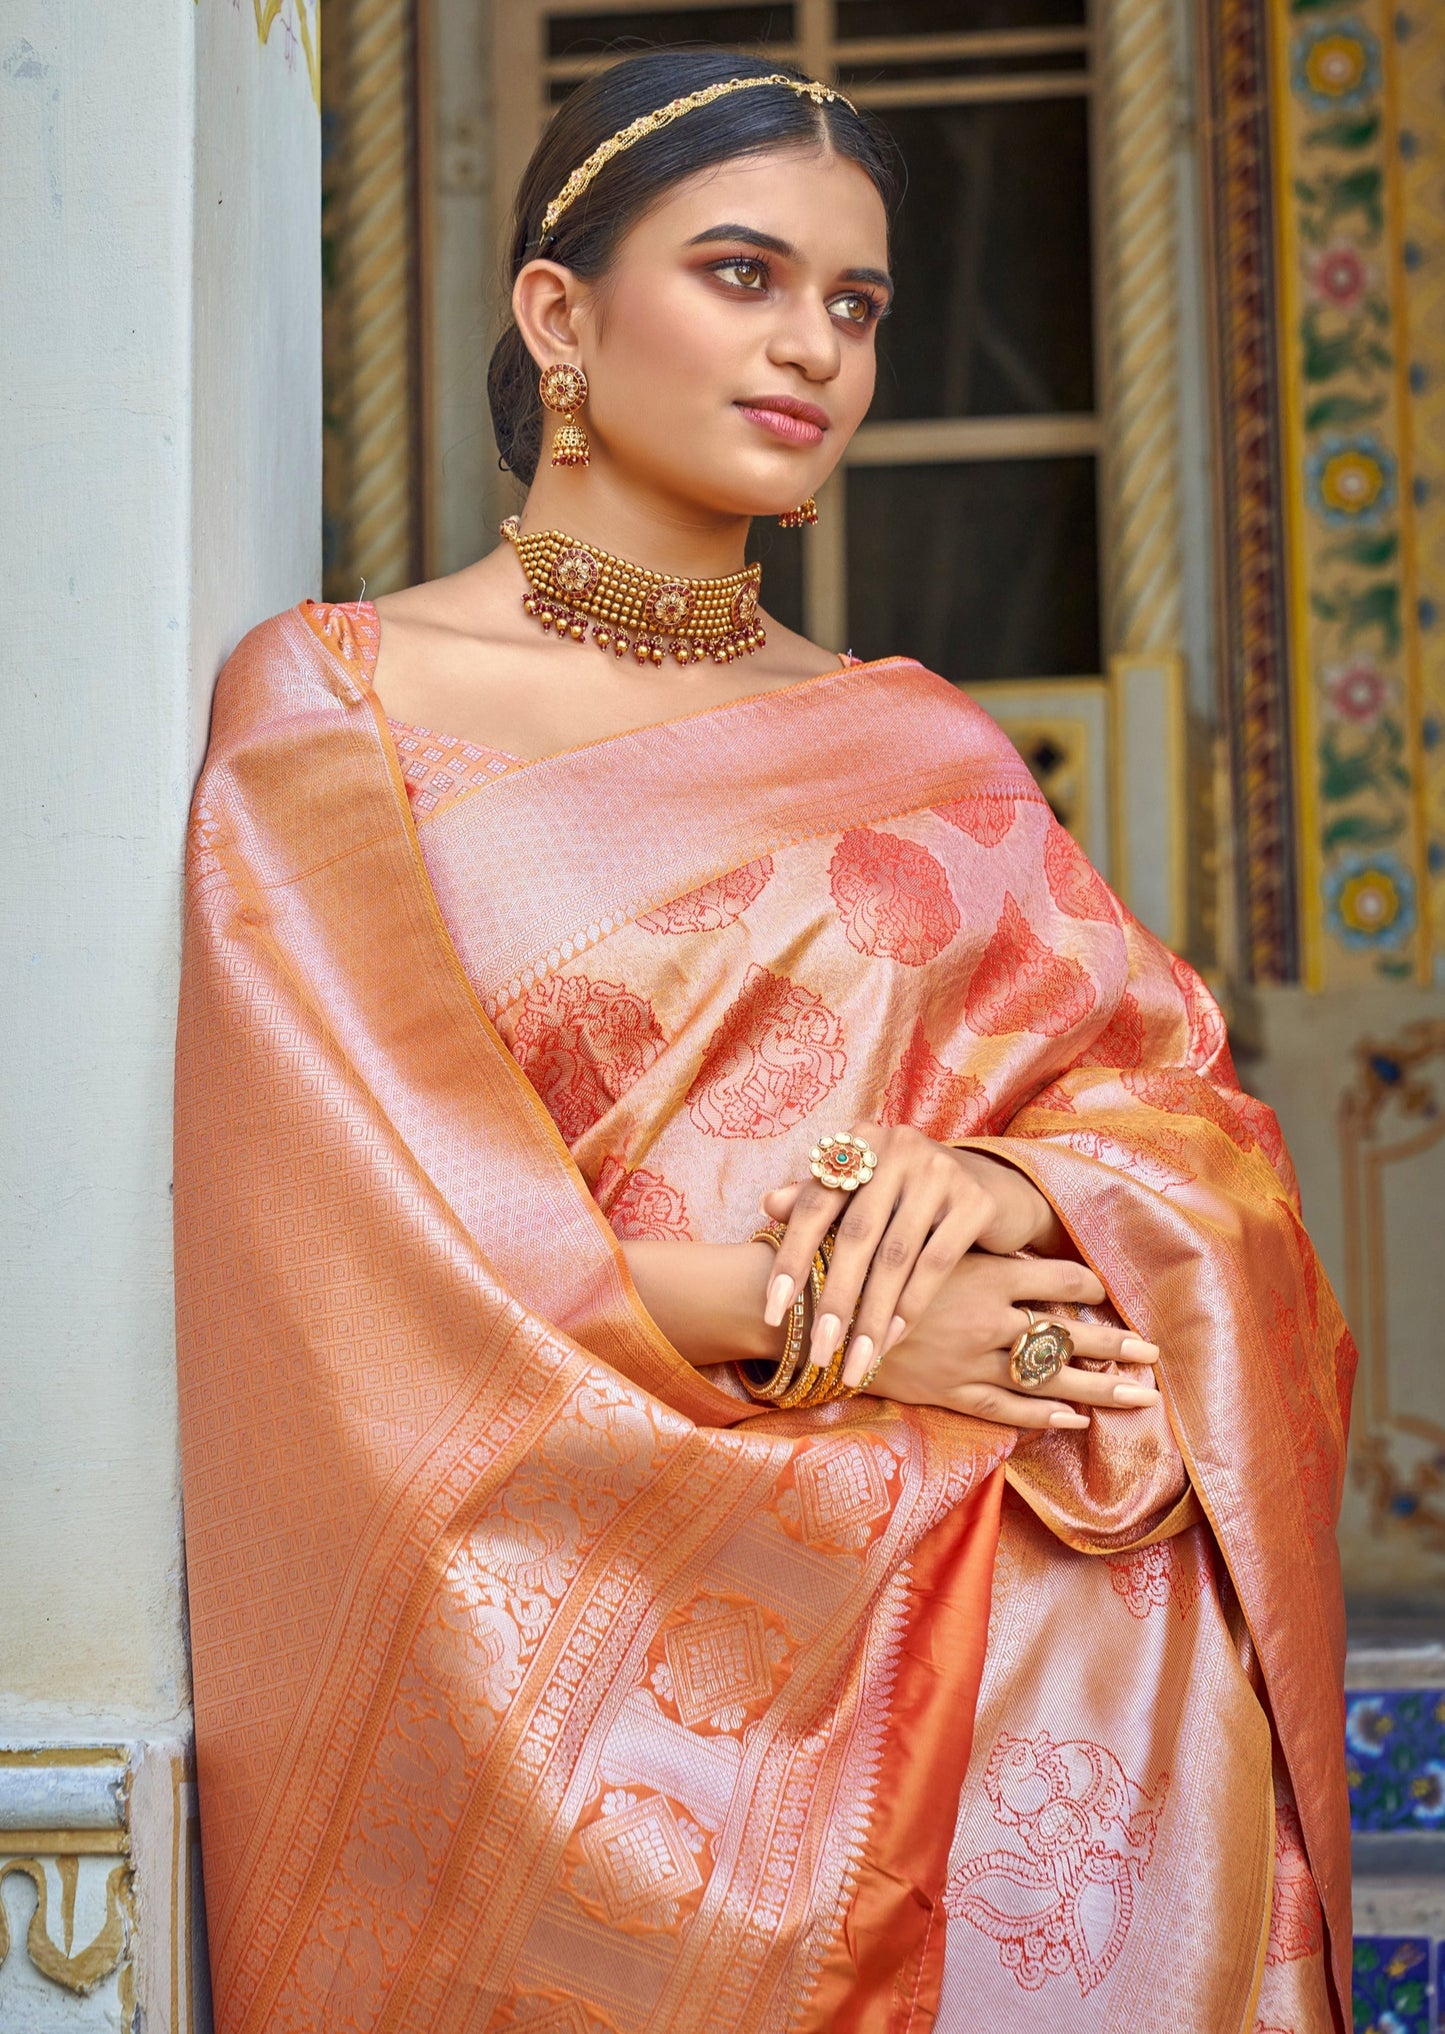 Woman in peach saree wearing traditional gold jewelry